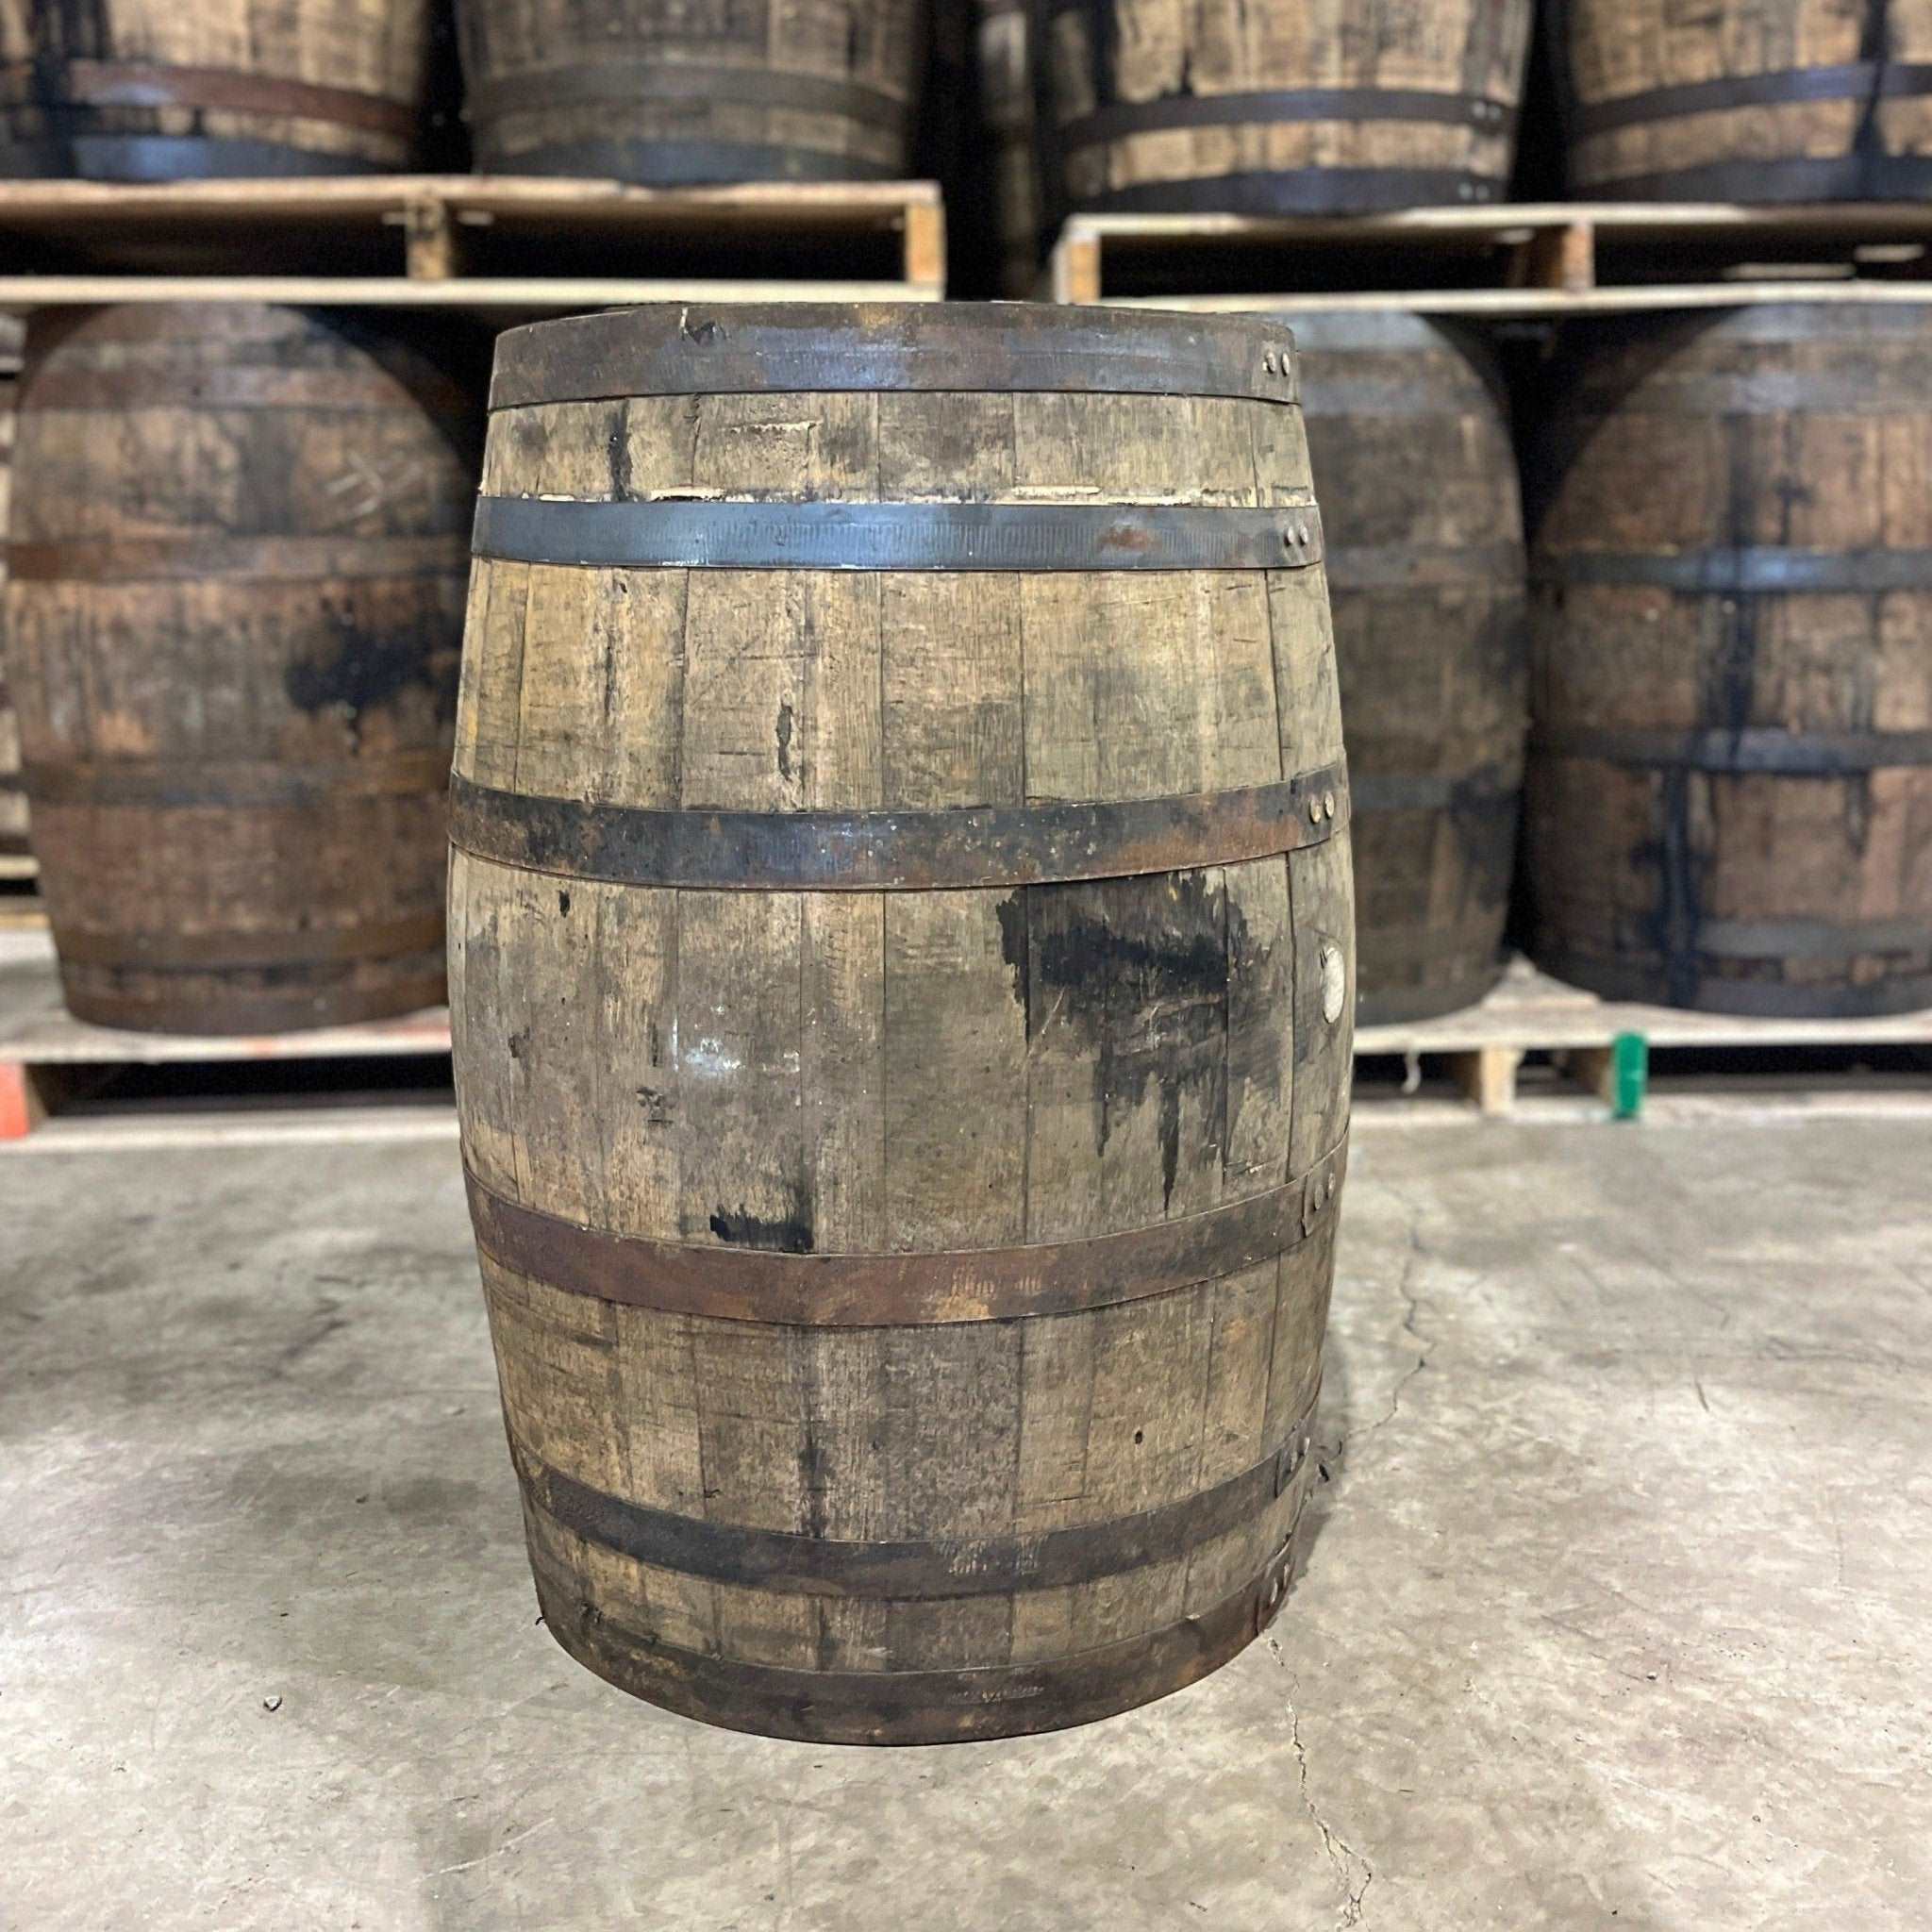 53 Gallon, 15 year George Dickel Bourbon Barrel - Fresh Empty, Once Used - The County Cooperage